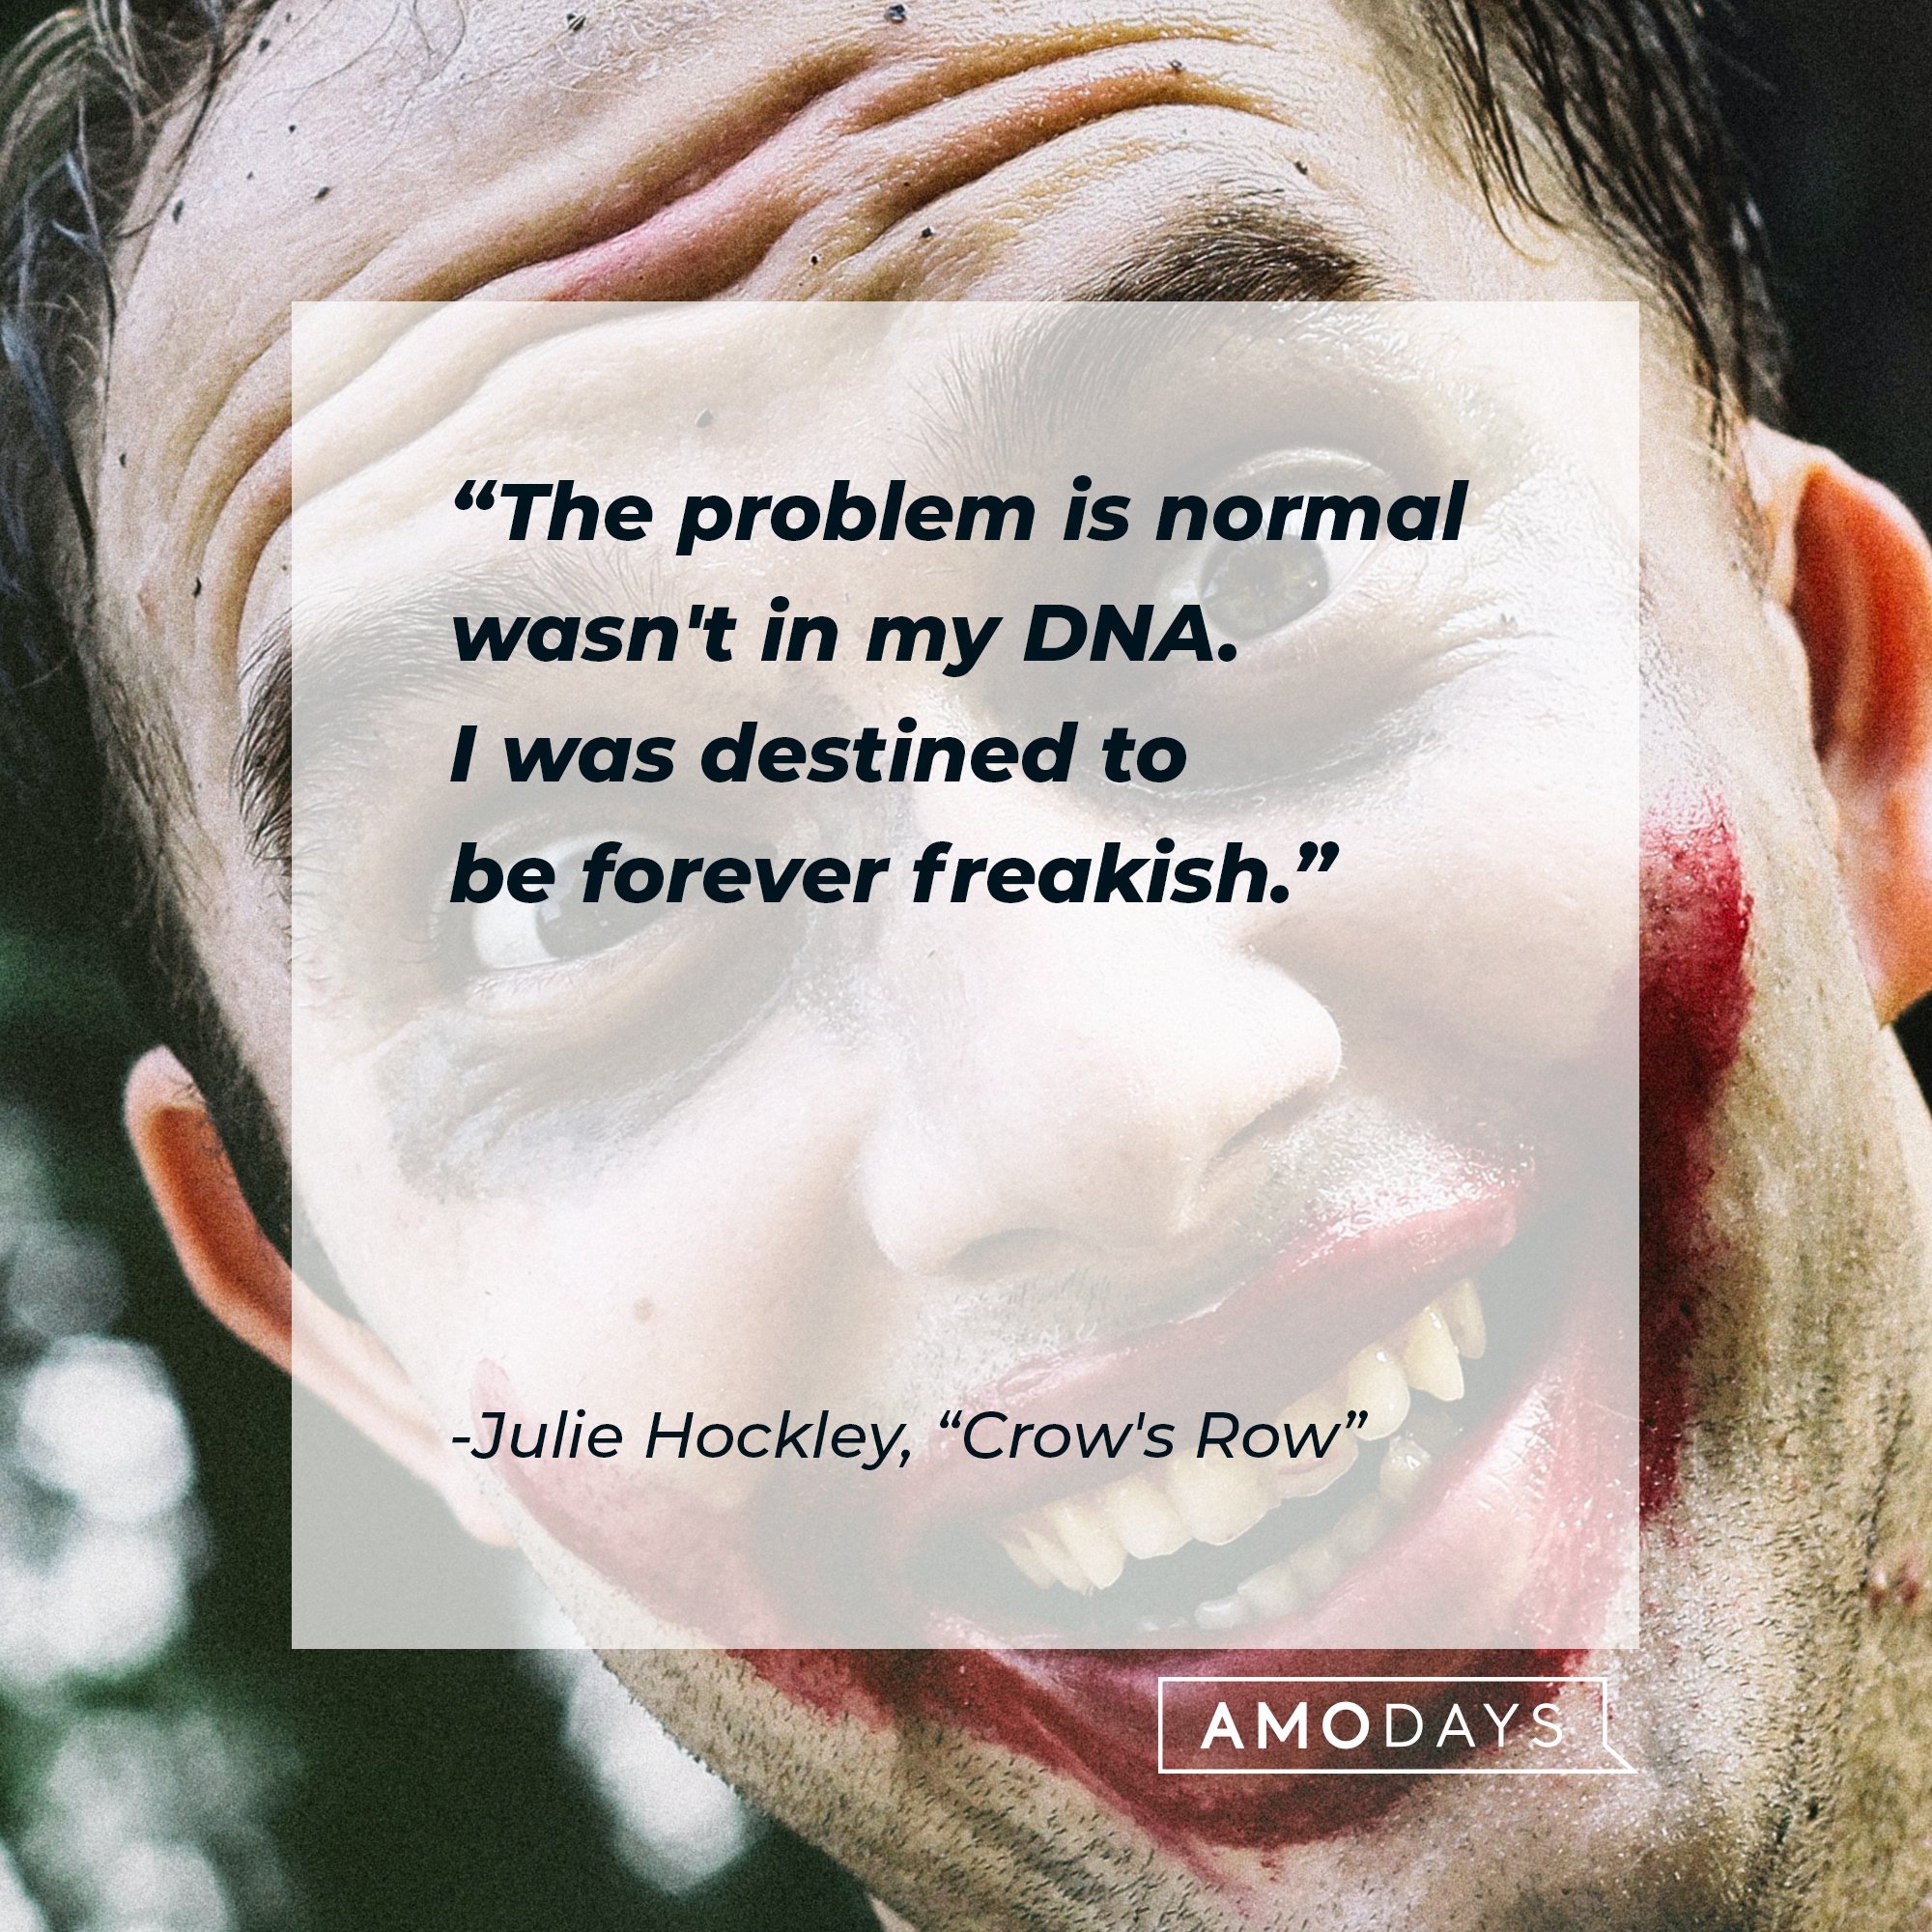 Julie Hockley’s quote from "Crow's Row": “The problem is normal wasn't in my DNA. I was destined to be forever freakish.” | Image: AmoDays